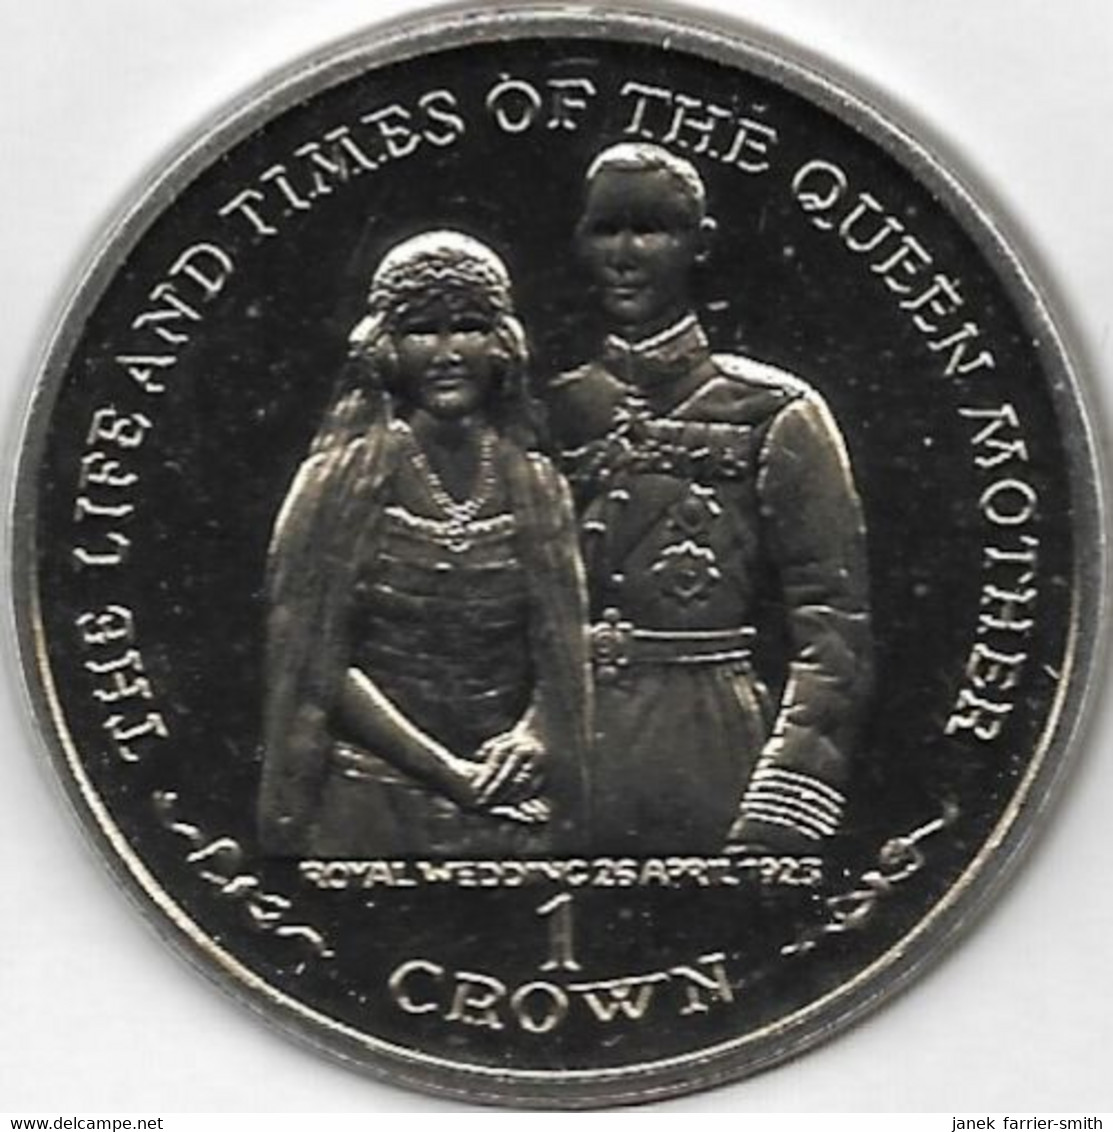 1999 Isle Of Man 1 Crown The Life & Times Of The Queen Mother 1923 Coin Cover - Eiland Man